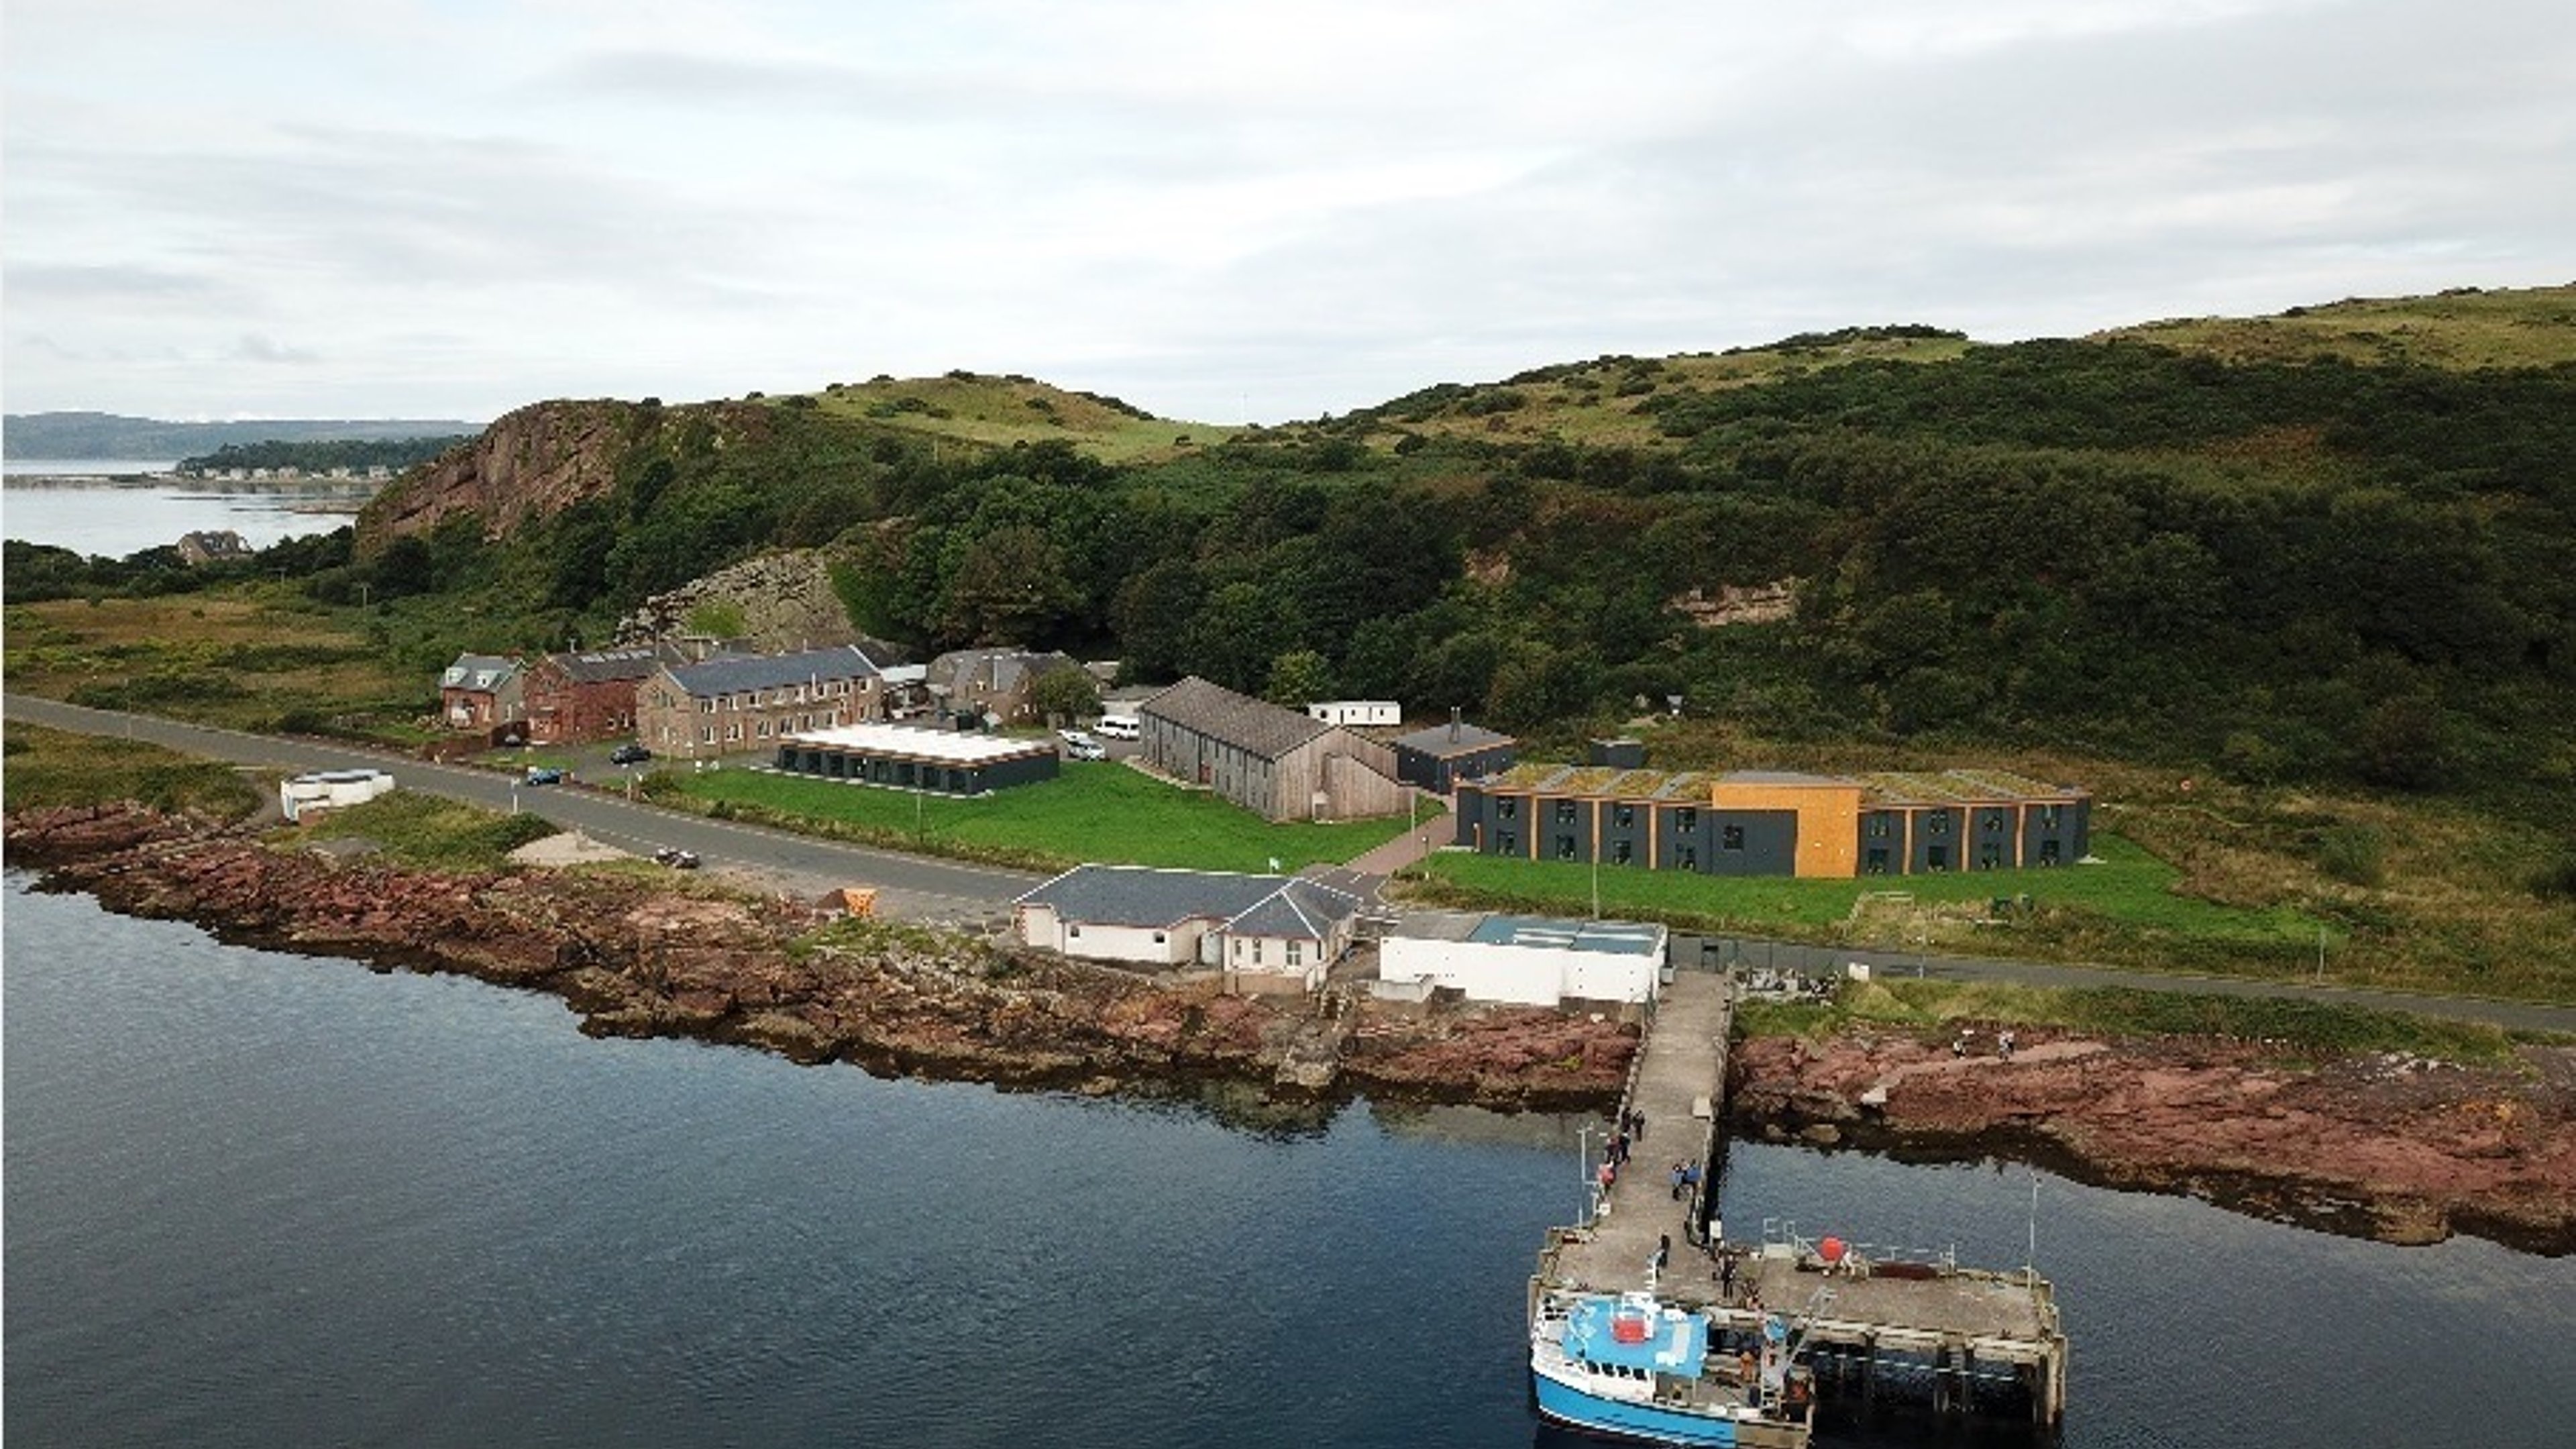 Real Family Holidays in the Scottish Islands